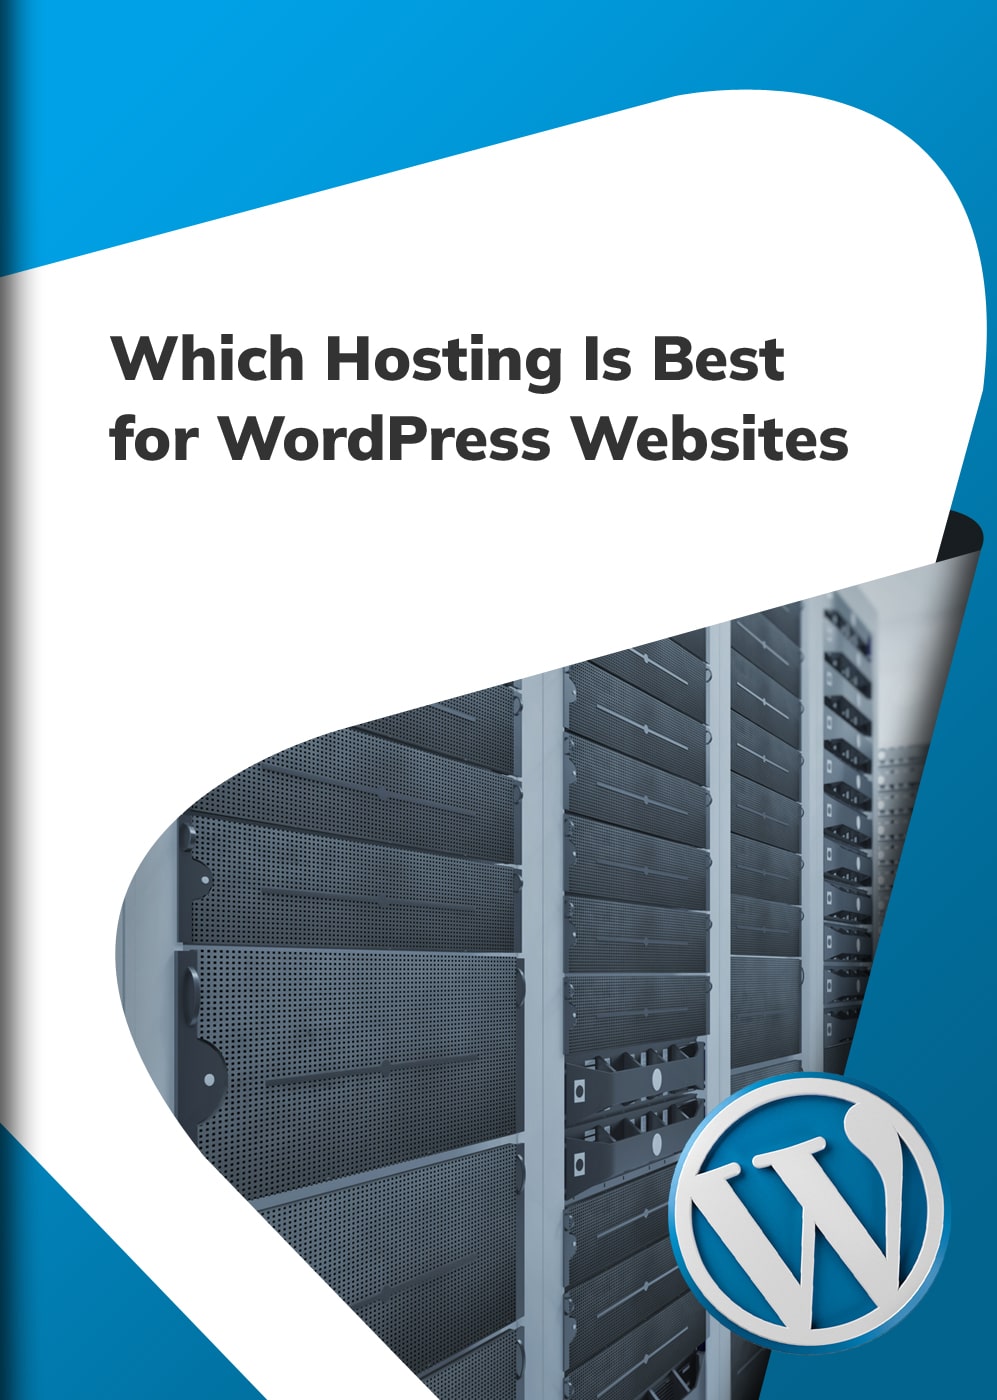 Which hosting is best for WordPress Websites